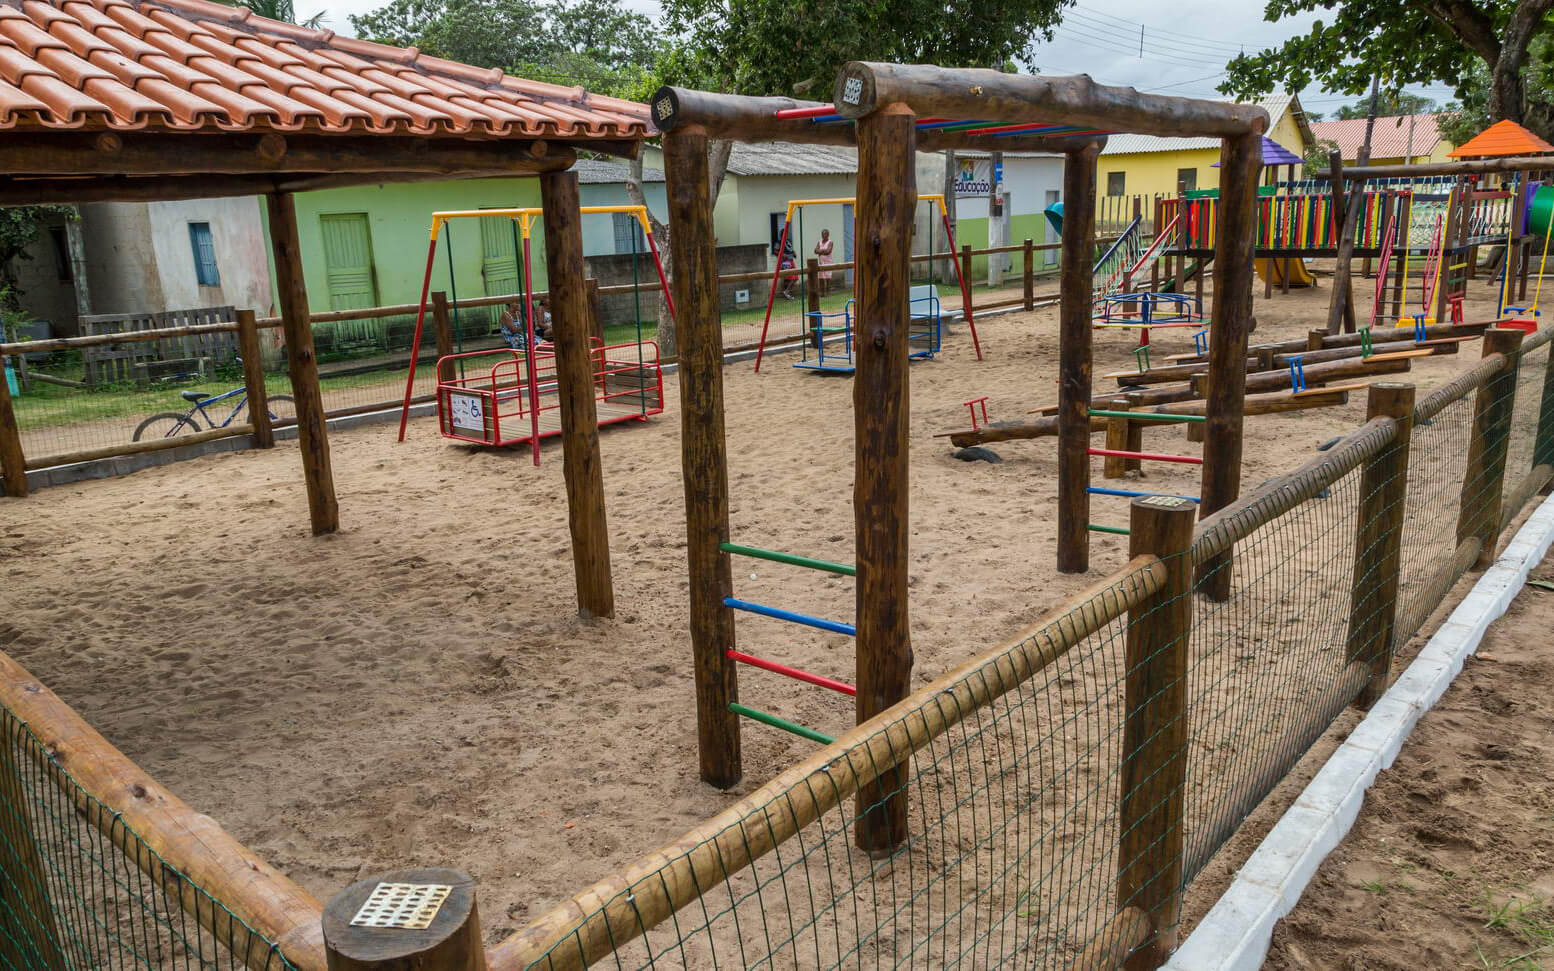 New recreation area for residents of Povoacao